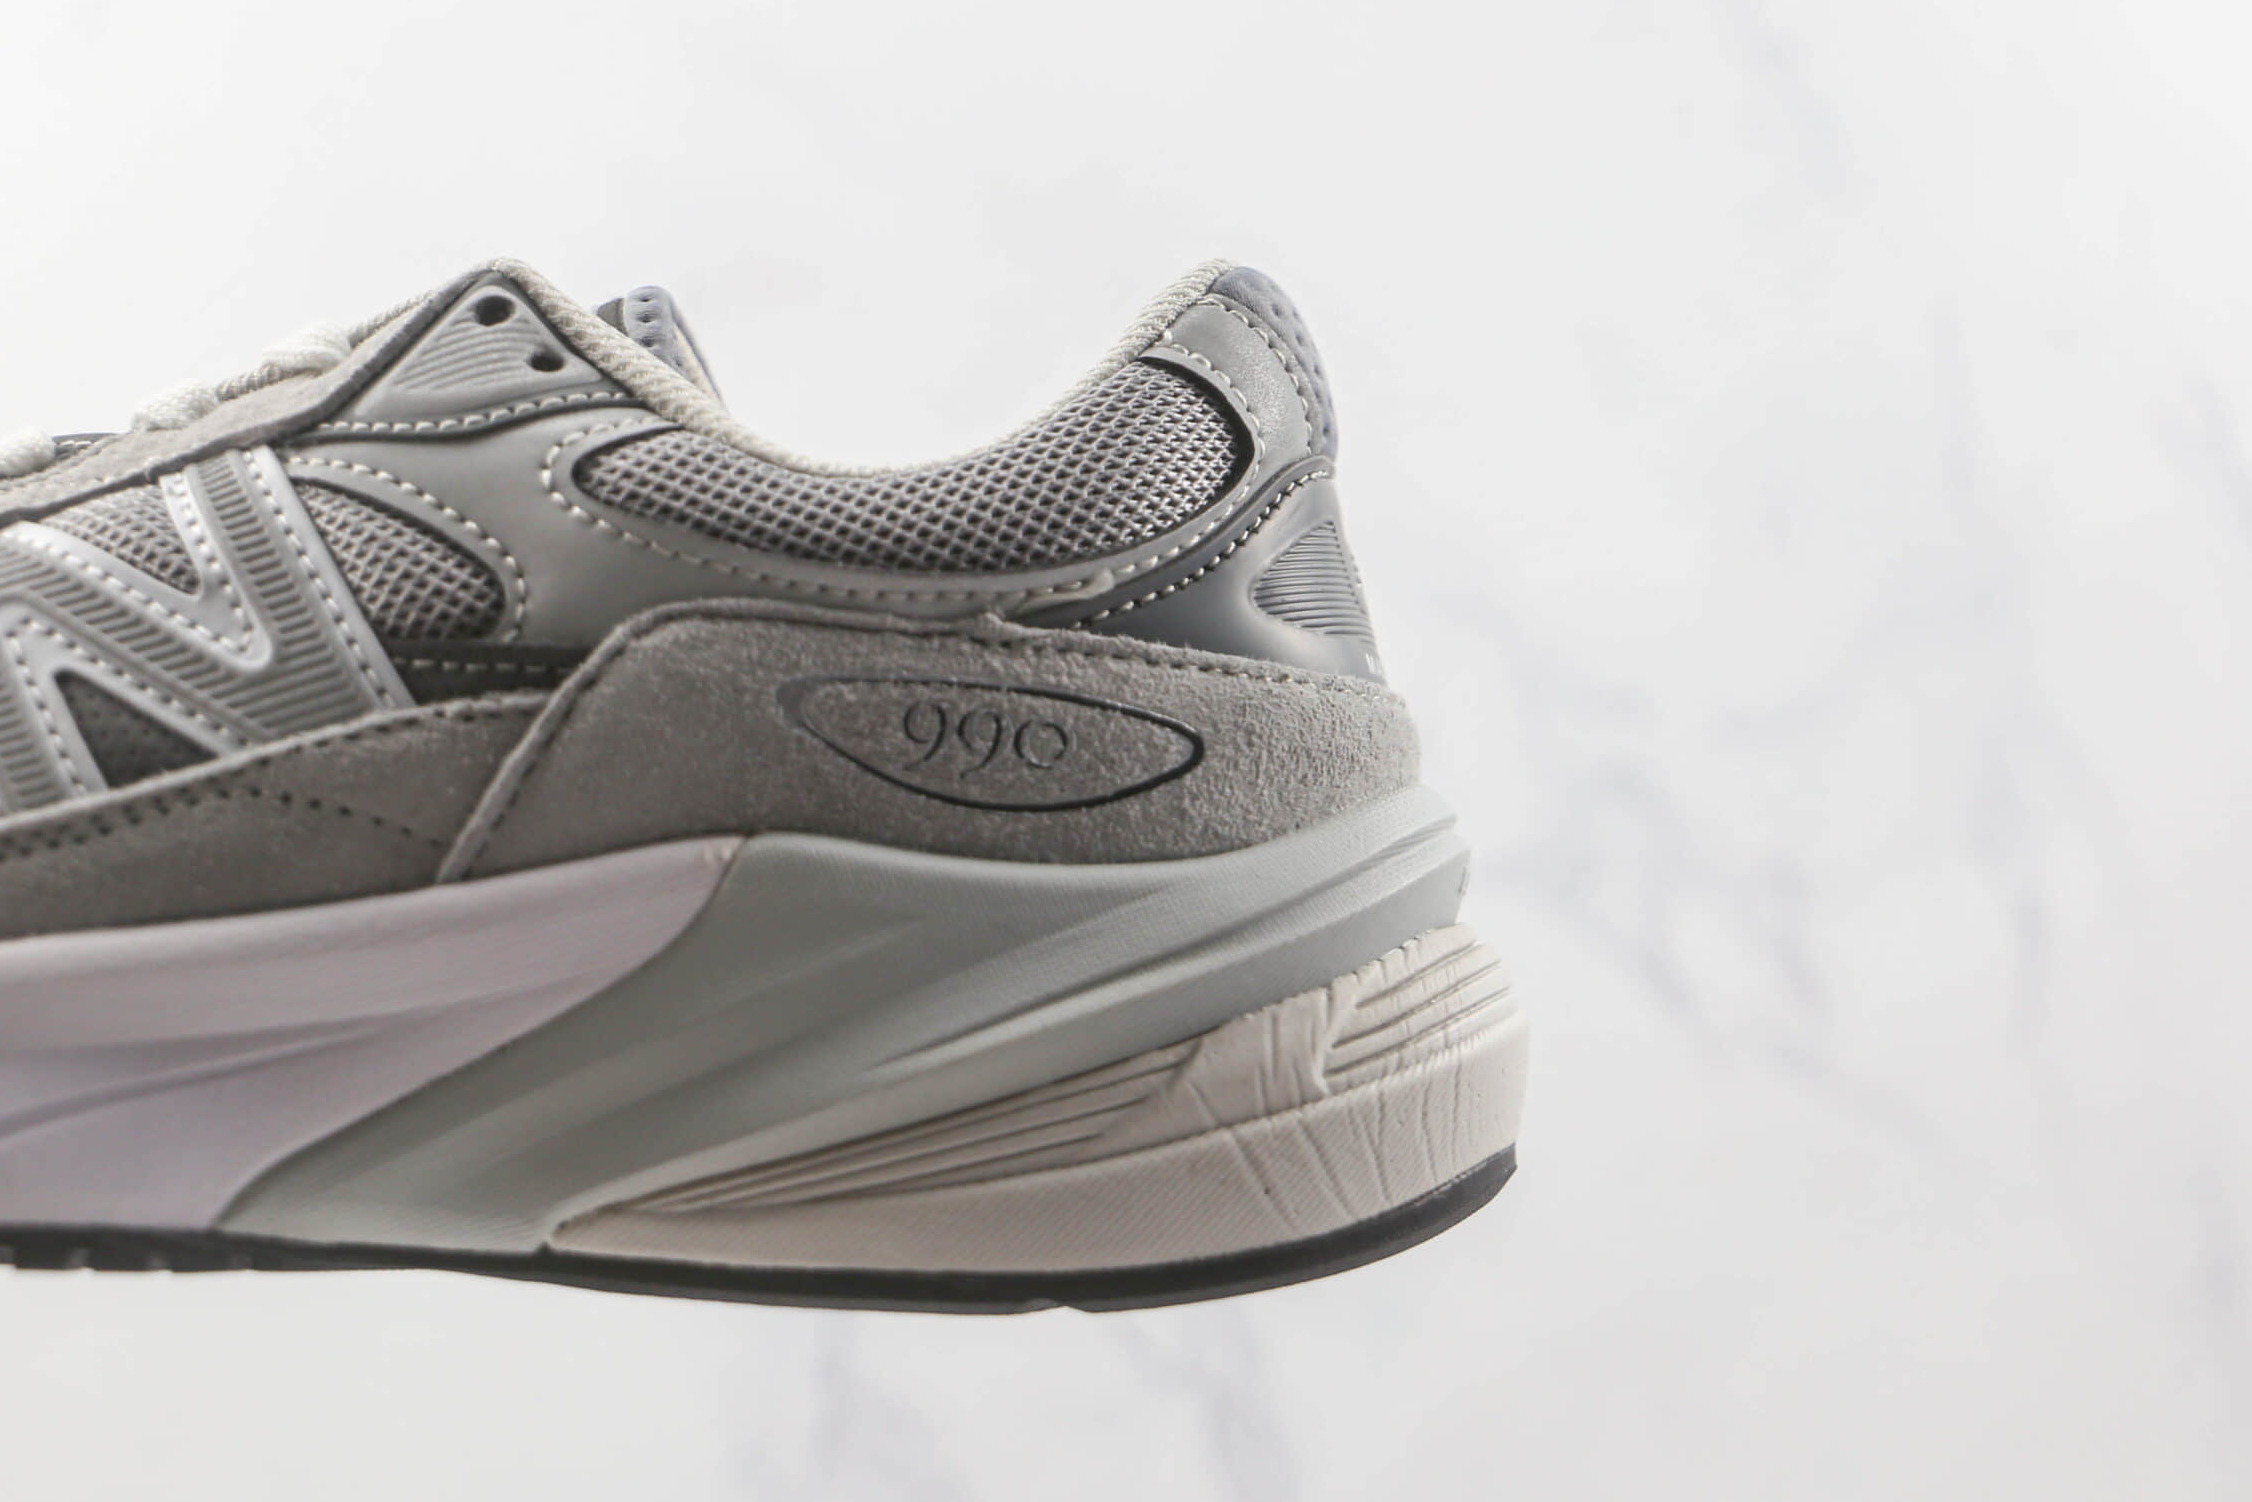 New Balance 990v6 Made in USA 'Grey' - Stylish and Comfortable Sneakers